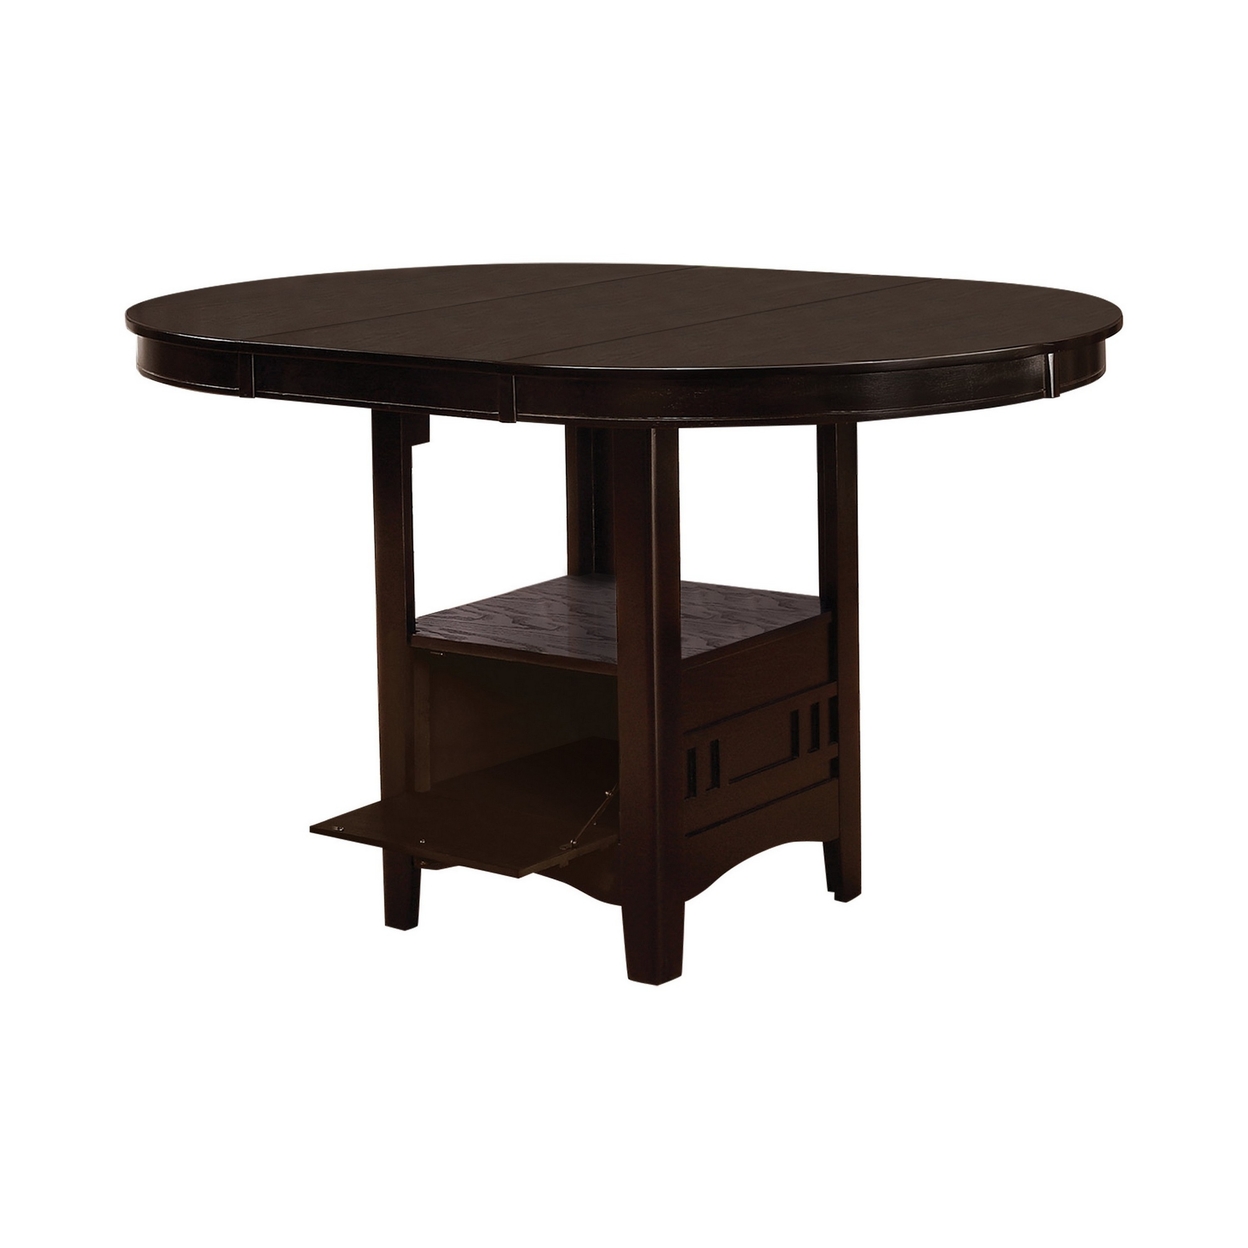 60 Inch Counter Height Table With Storage, Open Shelf, 6 Seater, Brown- Saltoro Sherpi